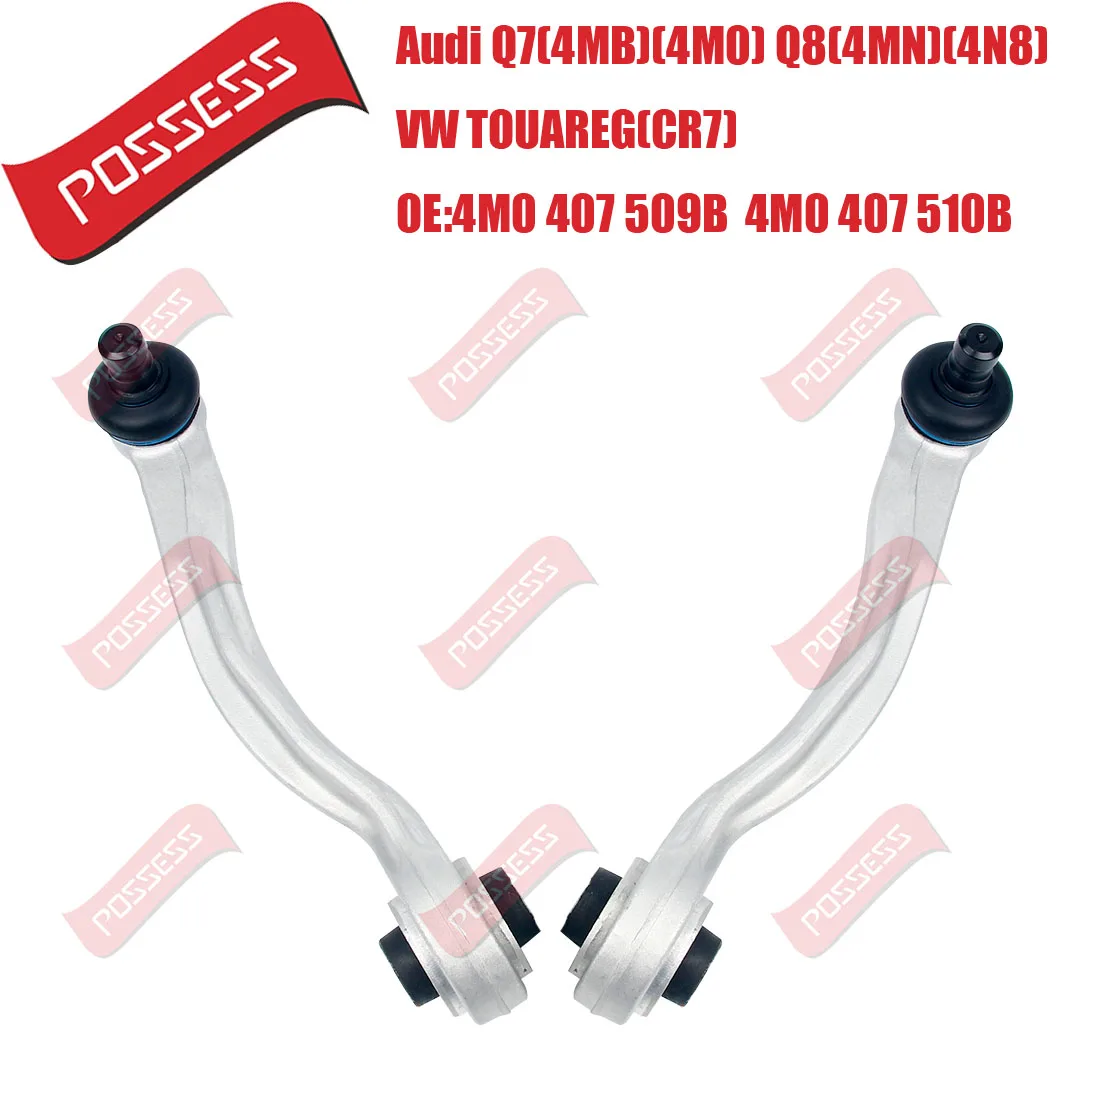 

A Pair of Front Upper Suspension Curved Control Arm For Audi A6 C8 A7 4KA A8 4N2 4N8 Q7 4MB Q8 4MN TOUAREG CR7 Cayenne 9Y0